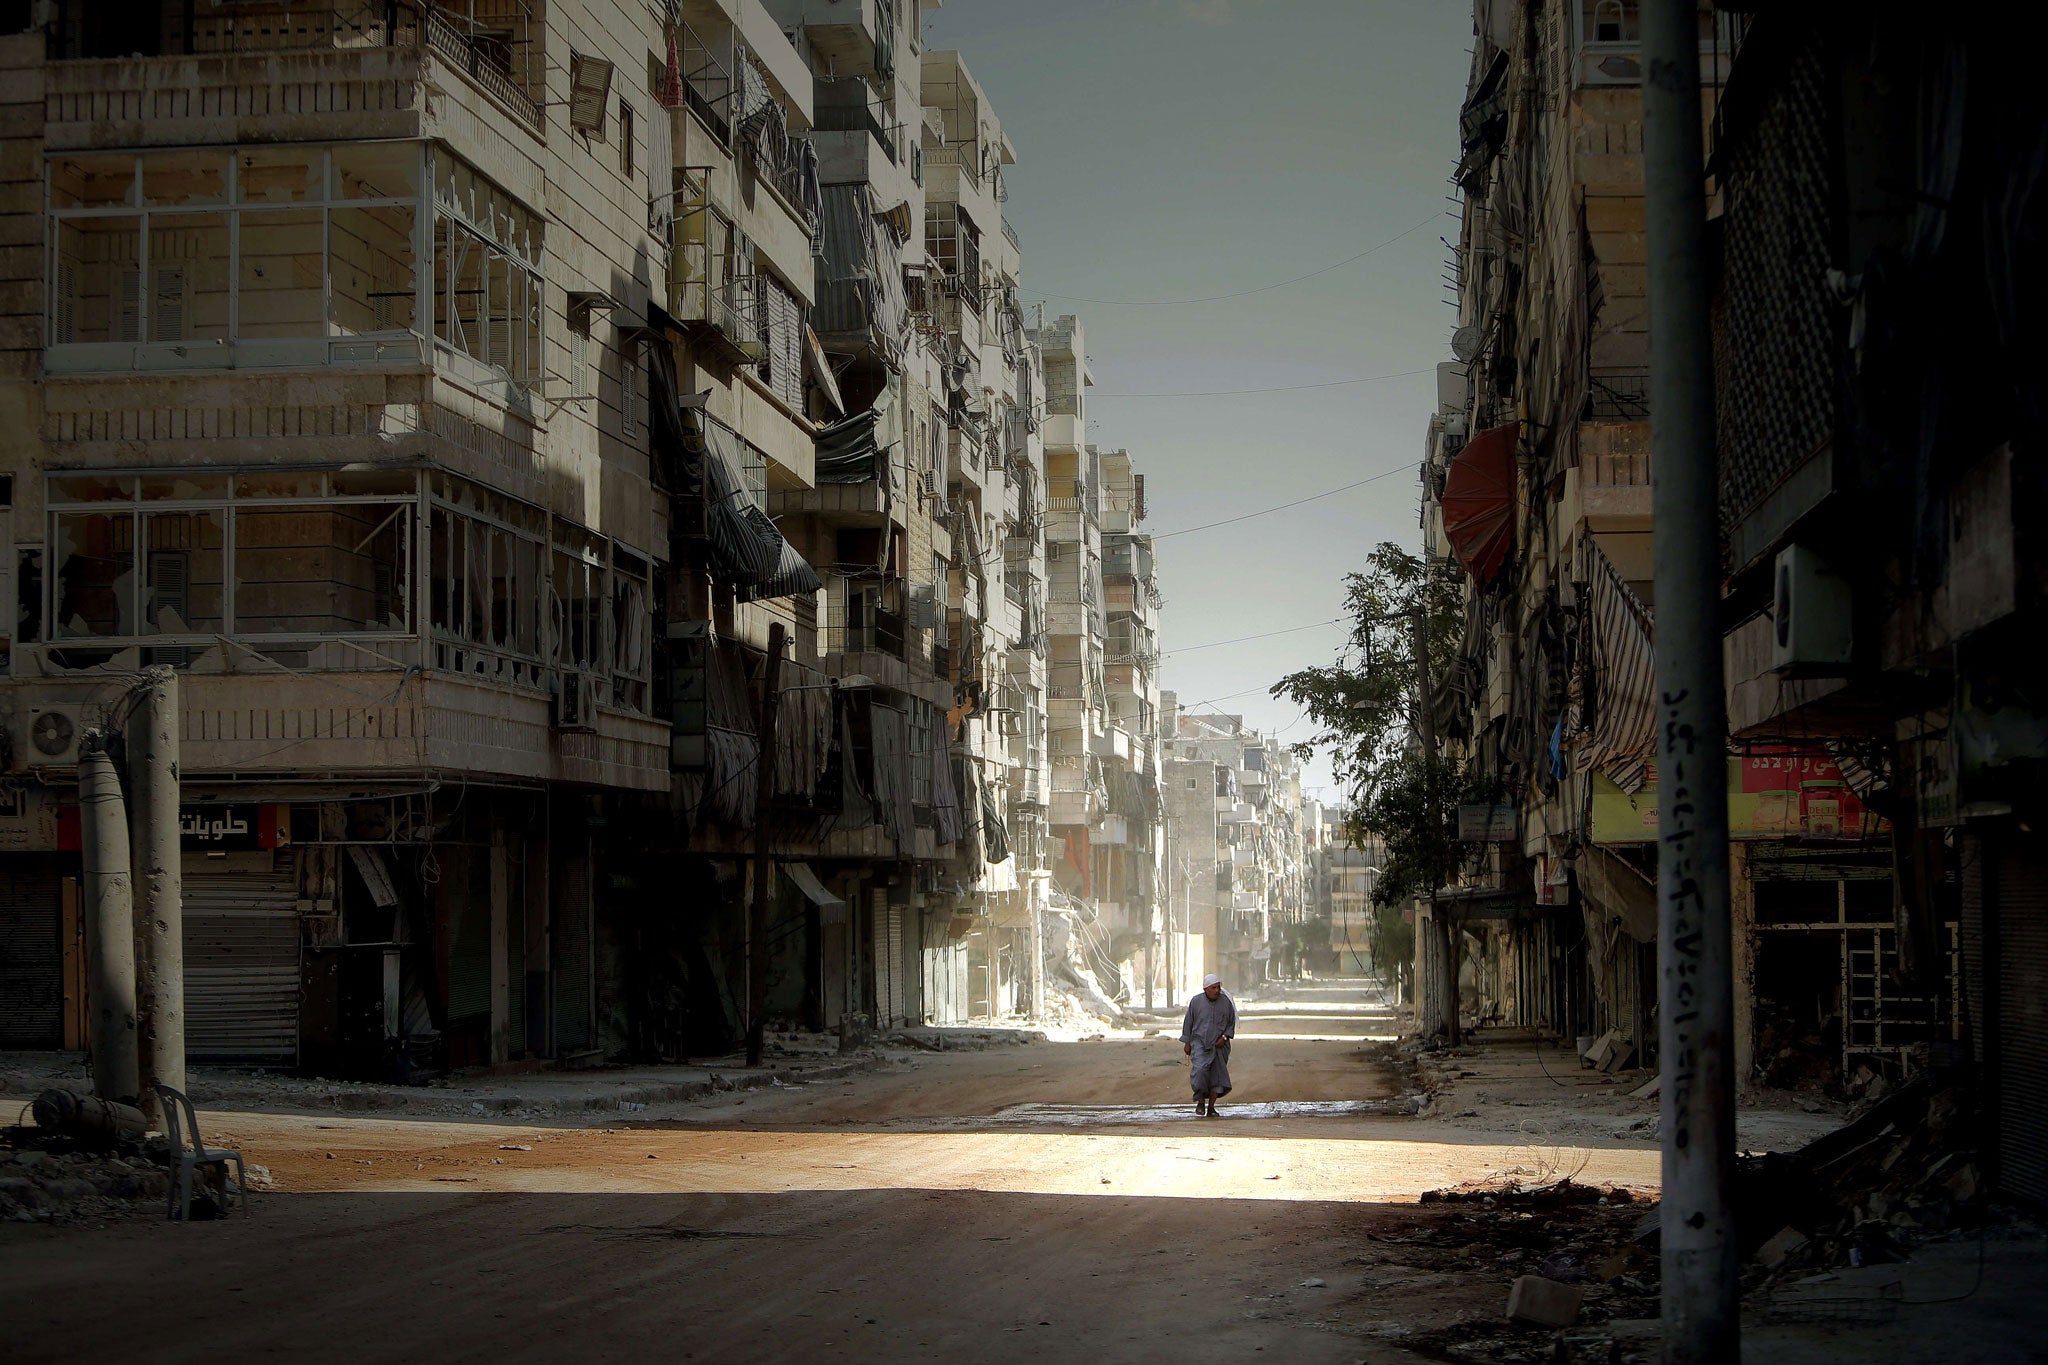 A Syrian man walks through a ravaged part of Aleppo in September